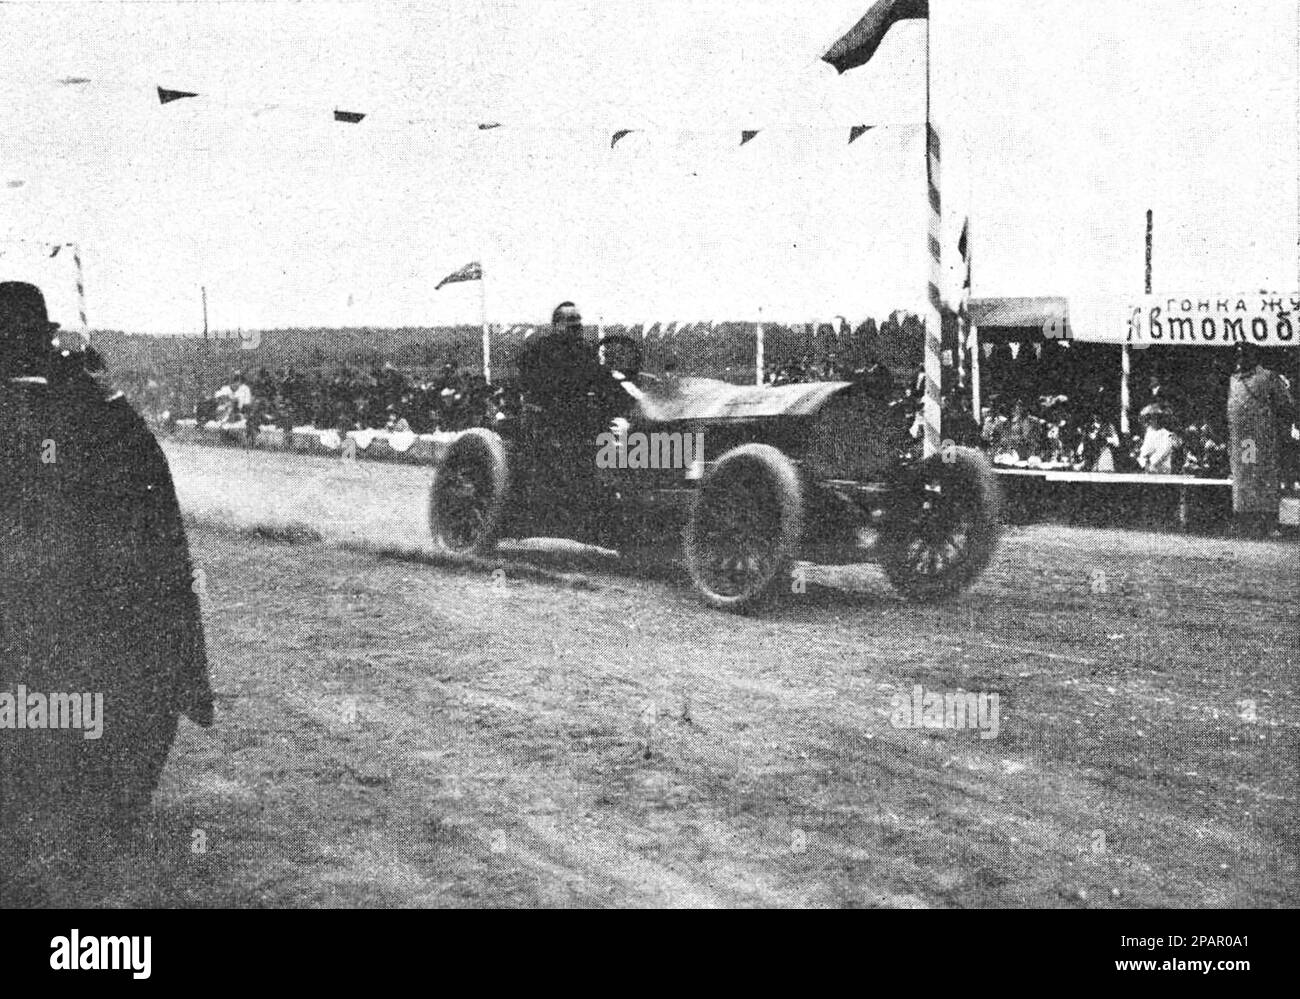 Automobile race for one verst near Moscow on May 14, 1910. Driver Dio in a Mercedes car finishes first. Photo from 1910. Stock Photo